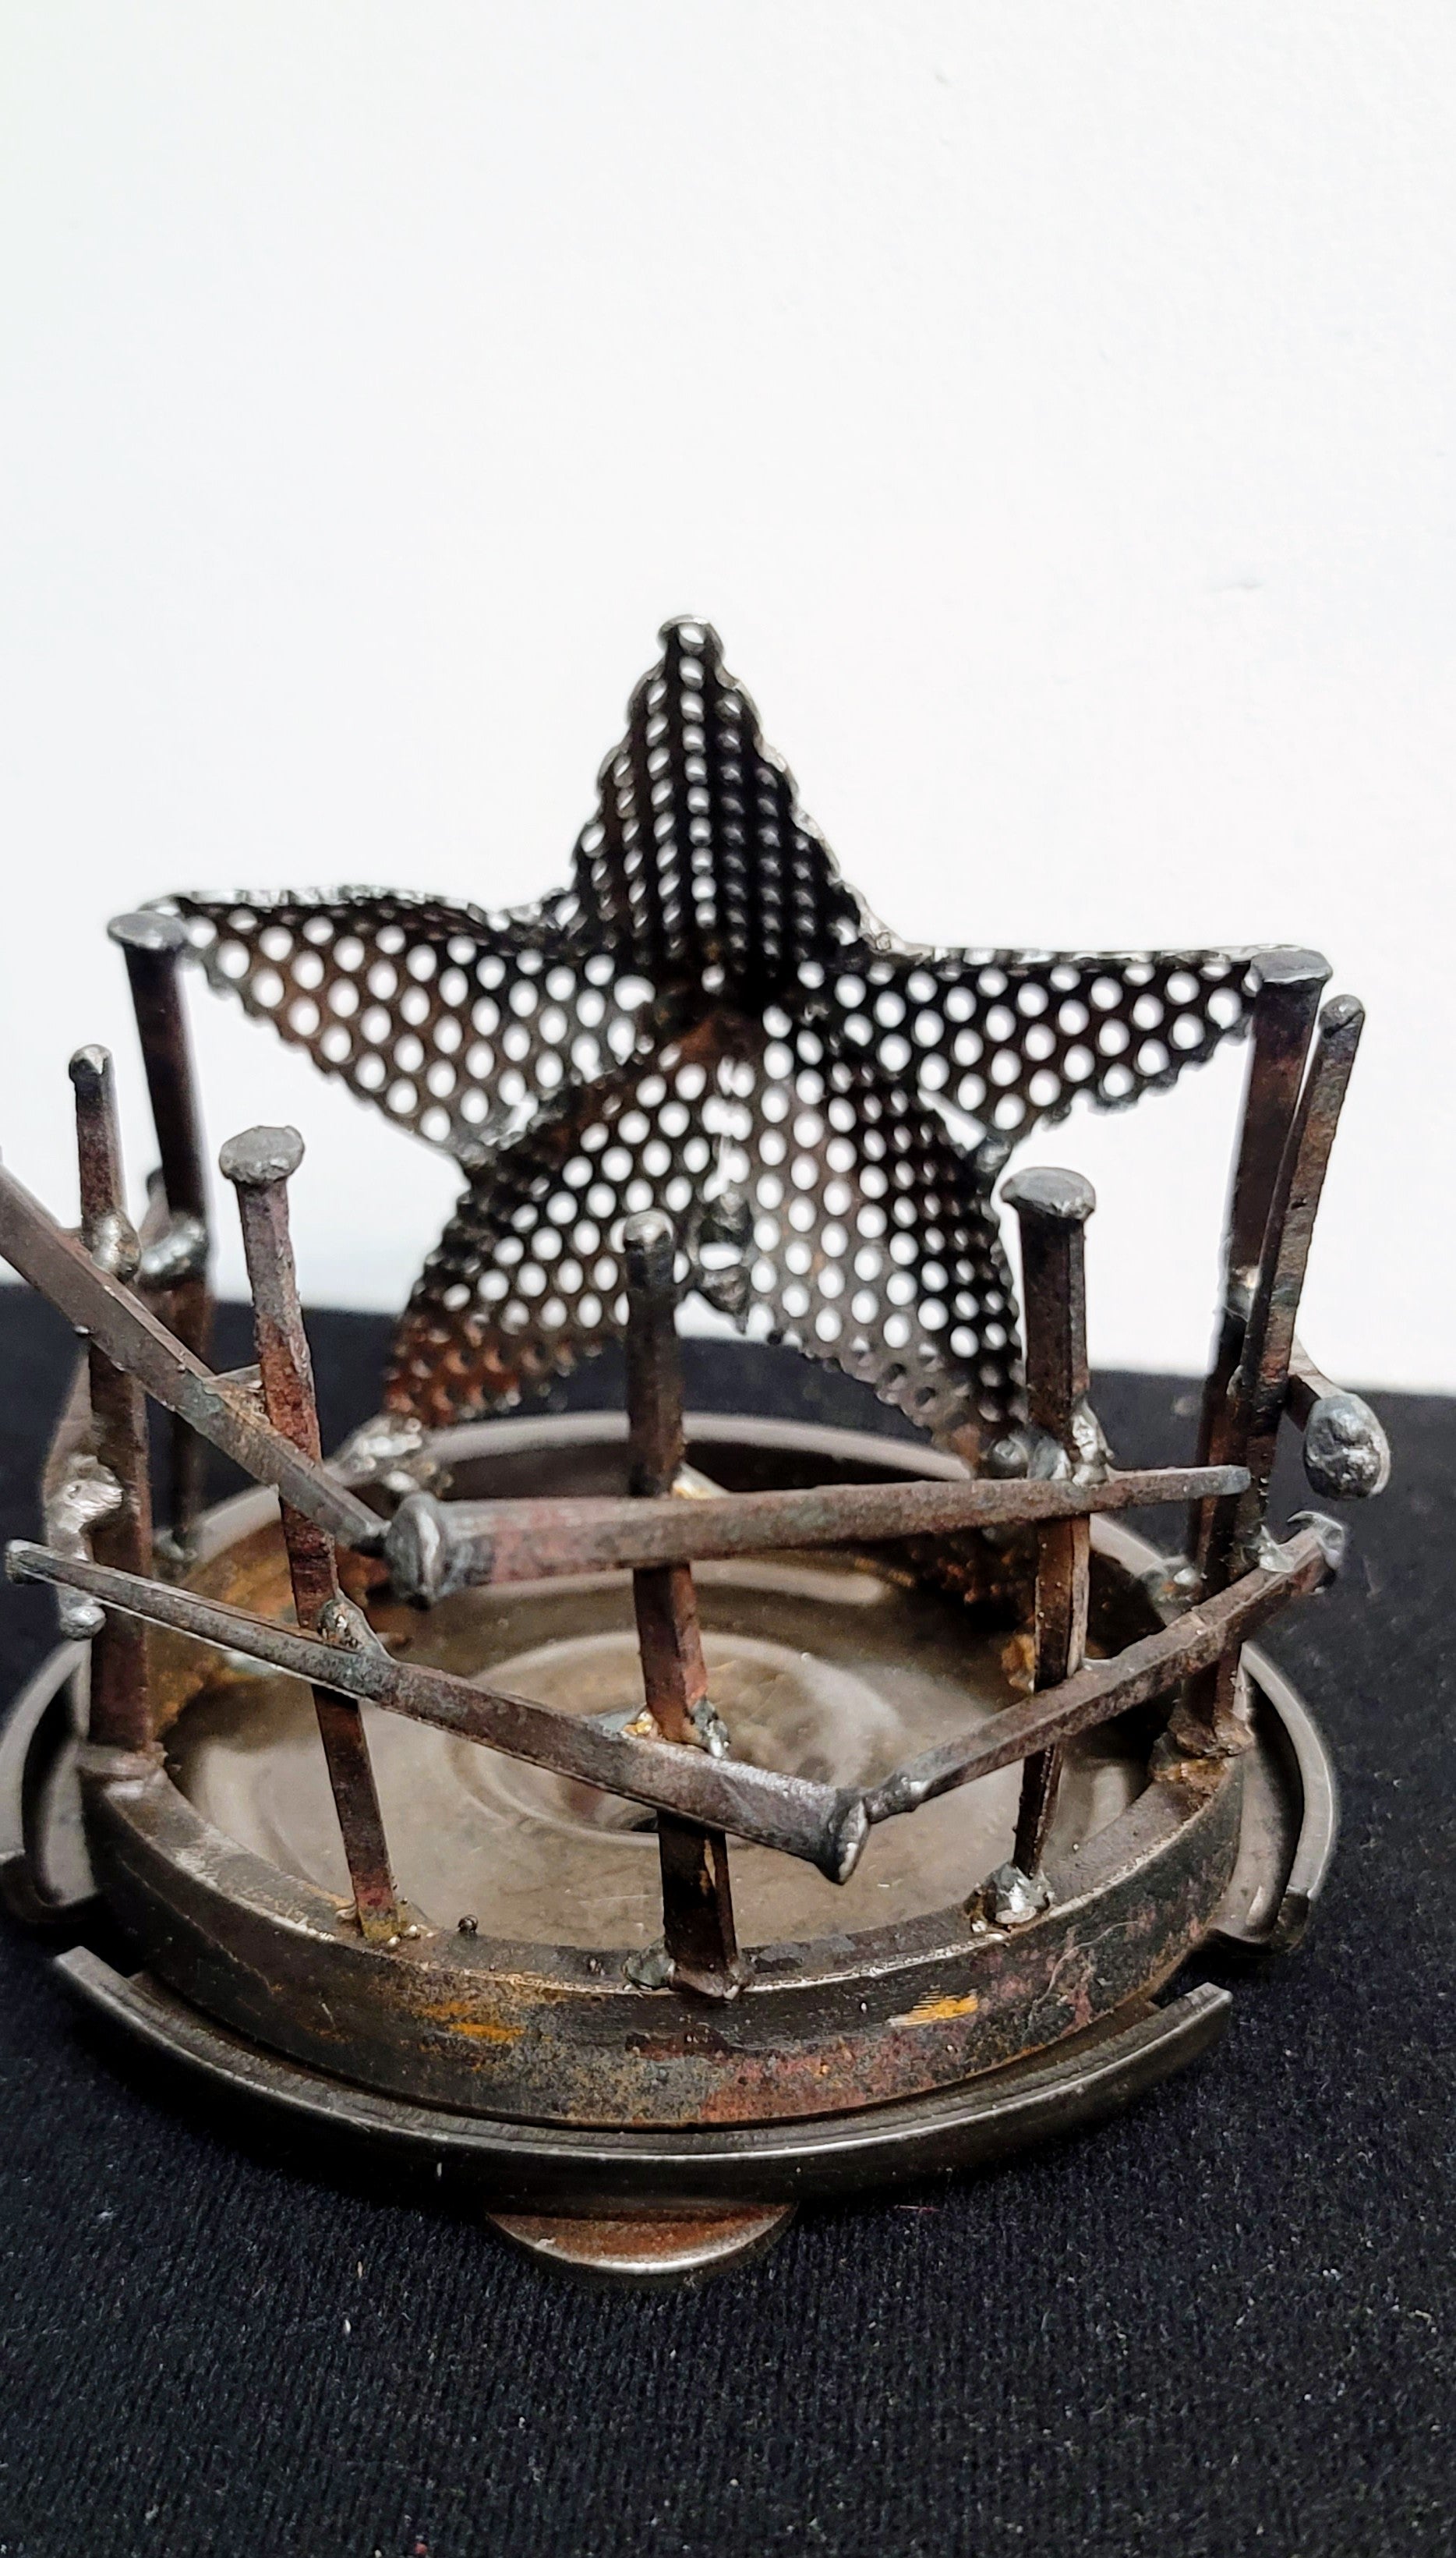 Steam Punk Star Recycled Candle Holder with vintage nails